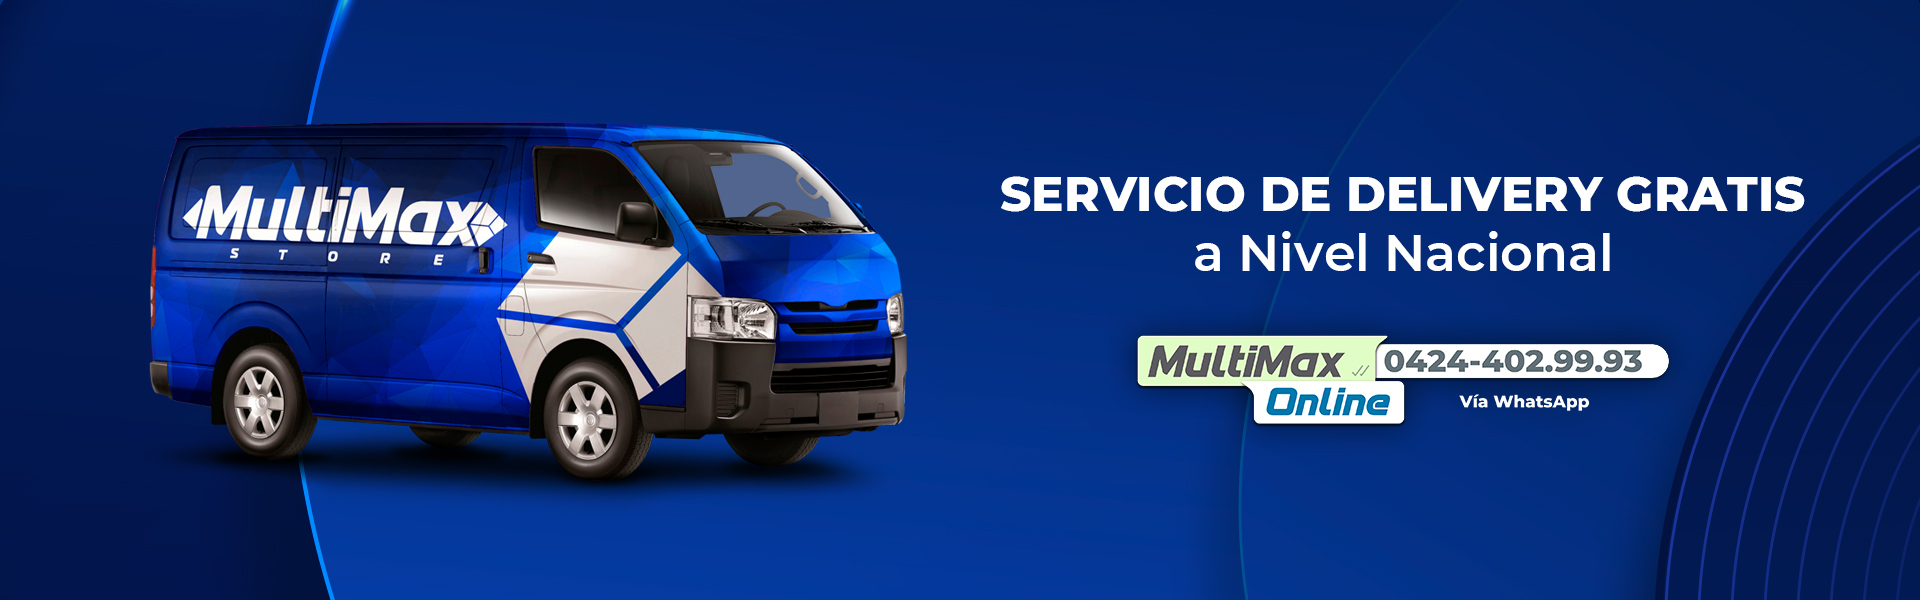 Multimax Store Delivery